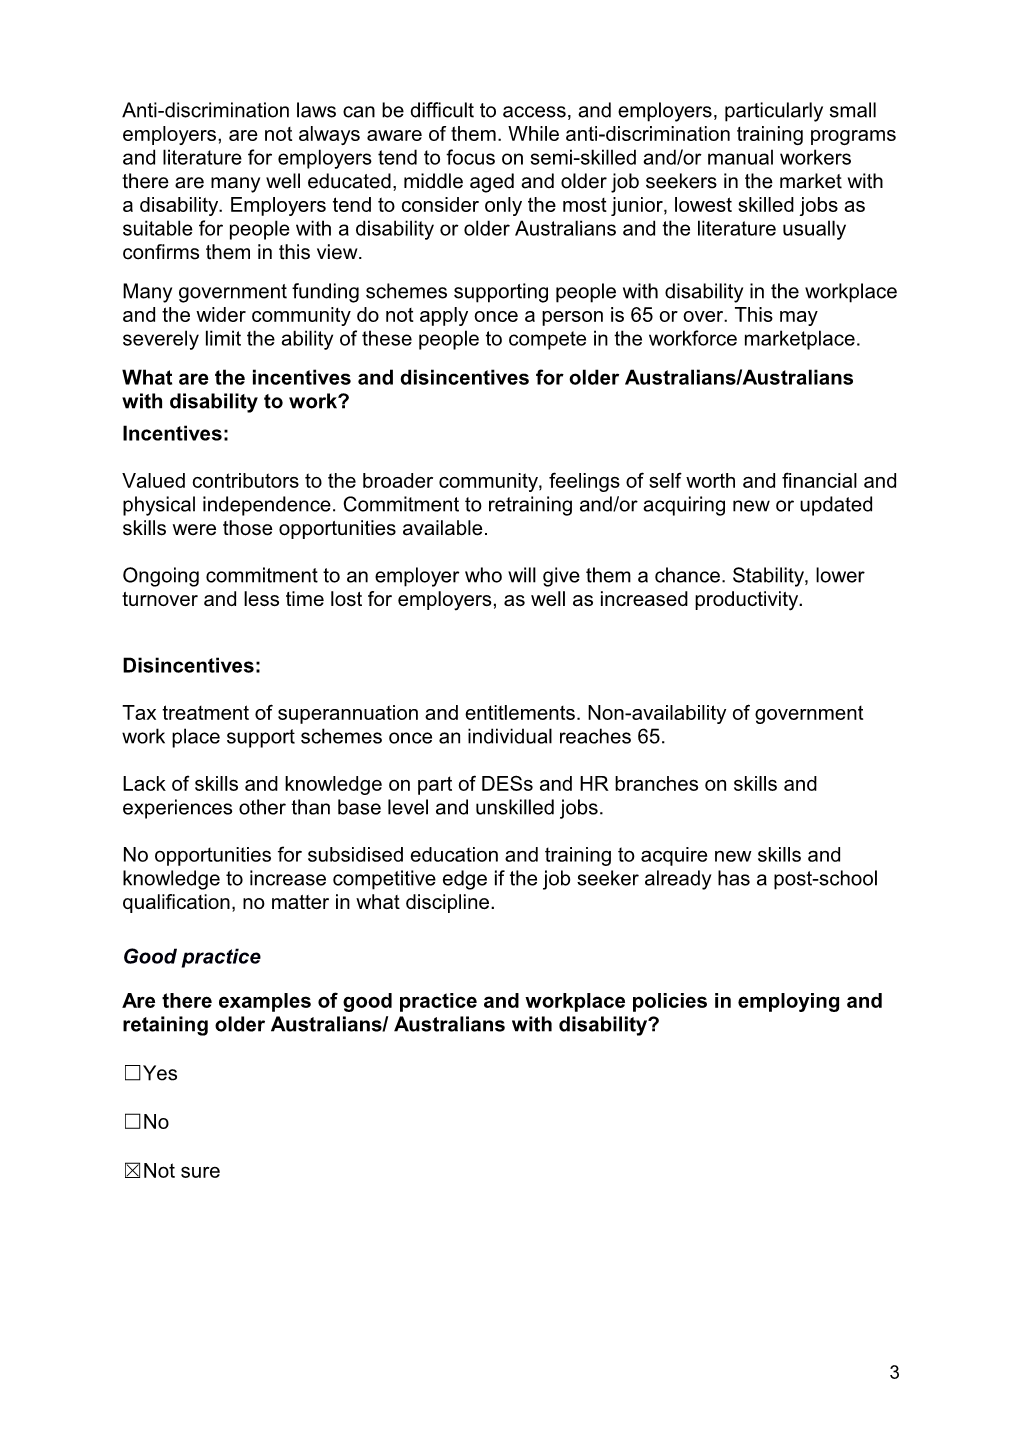 Willing to Work: National Inquiry Into Employment Discrimination Against Older Australians s9